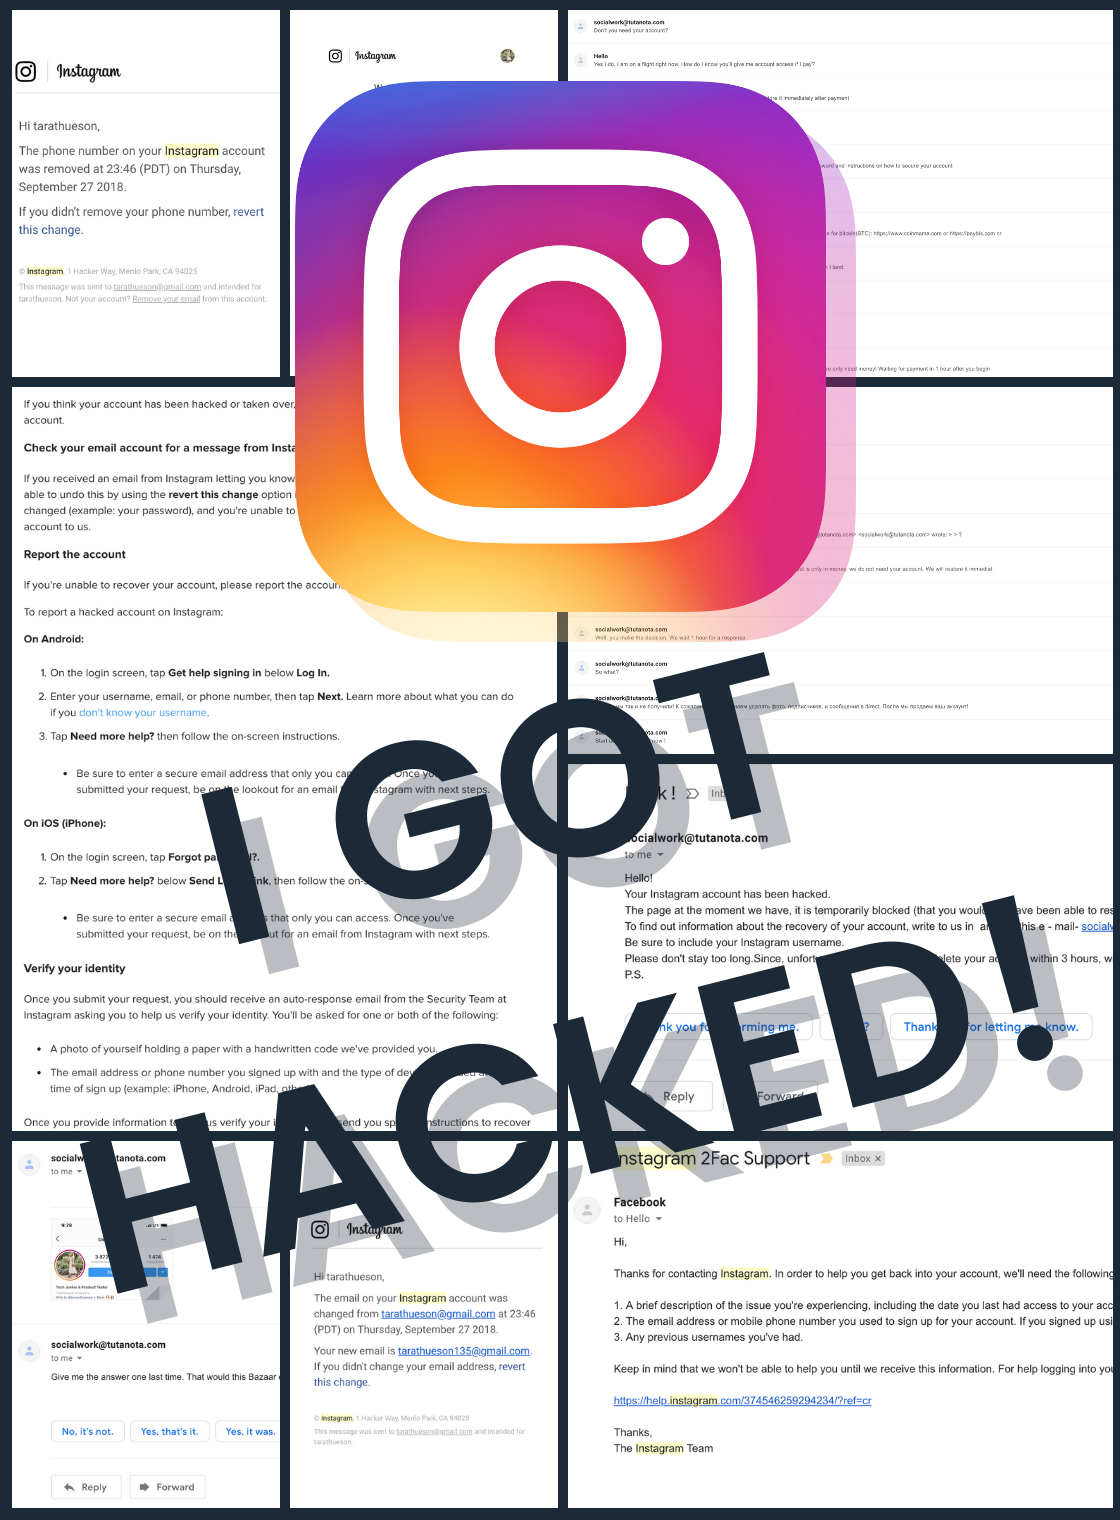 How Many Instagram Accounts Get Hacked